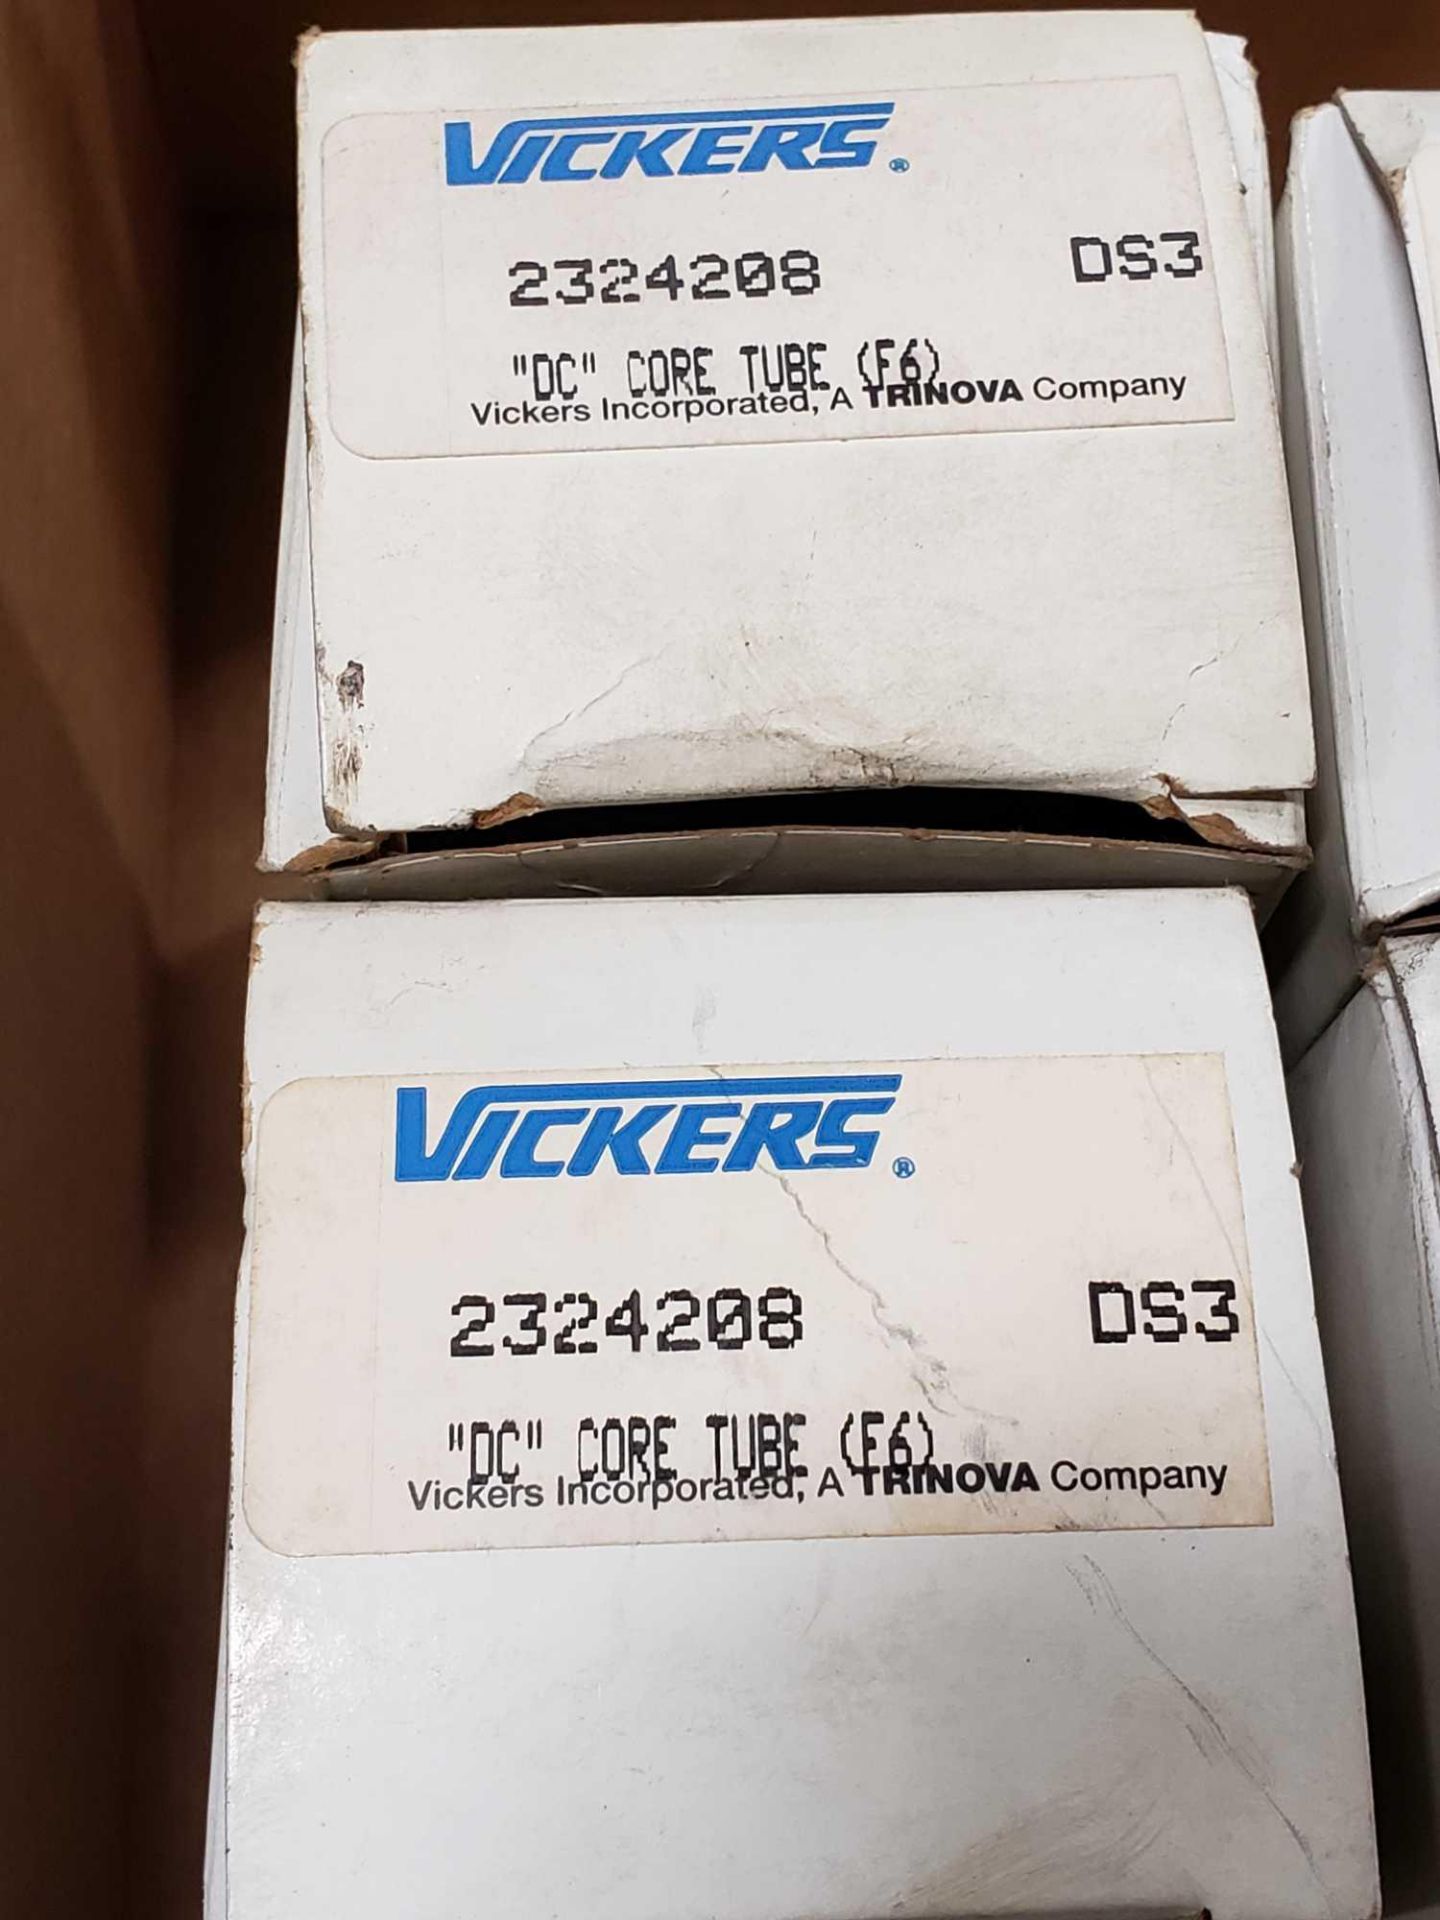 Qty 5 - Vickers core tube part number 2324208 for model DGSME-01-20-T8 plate. New in box. - Image 2 of 3